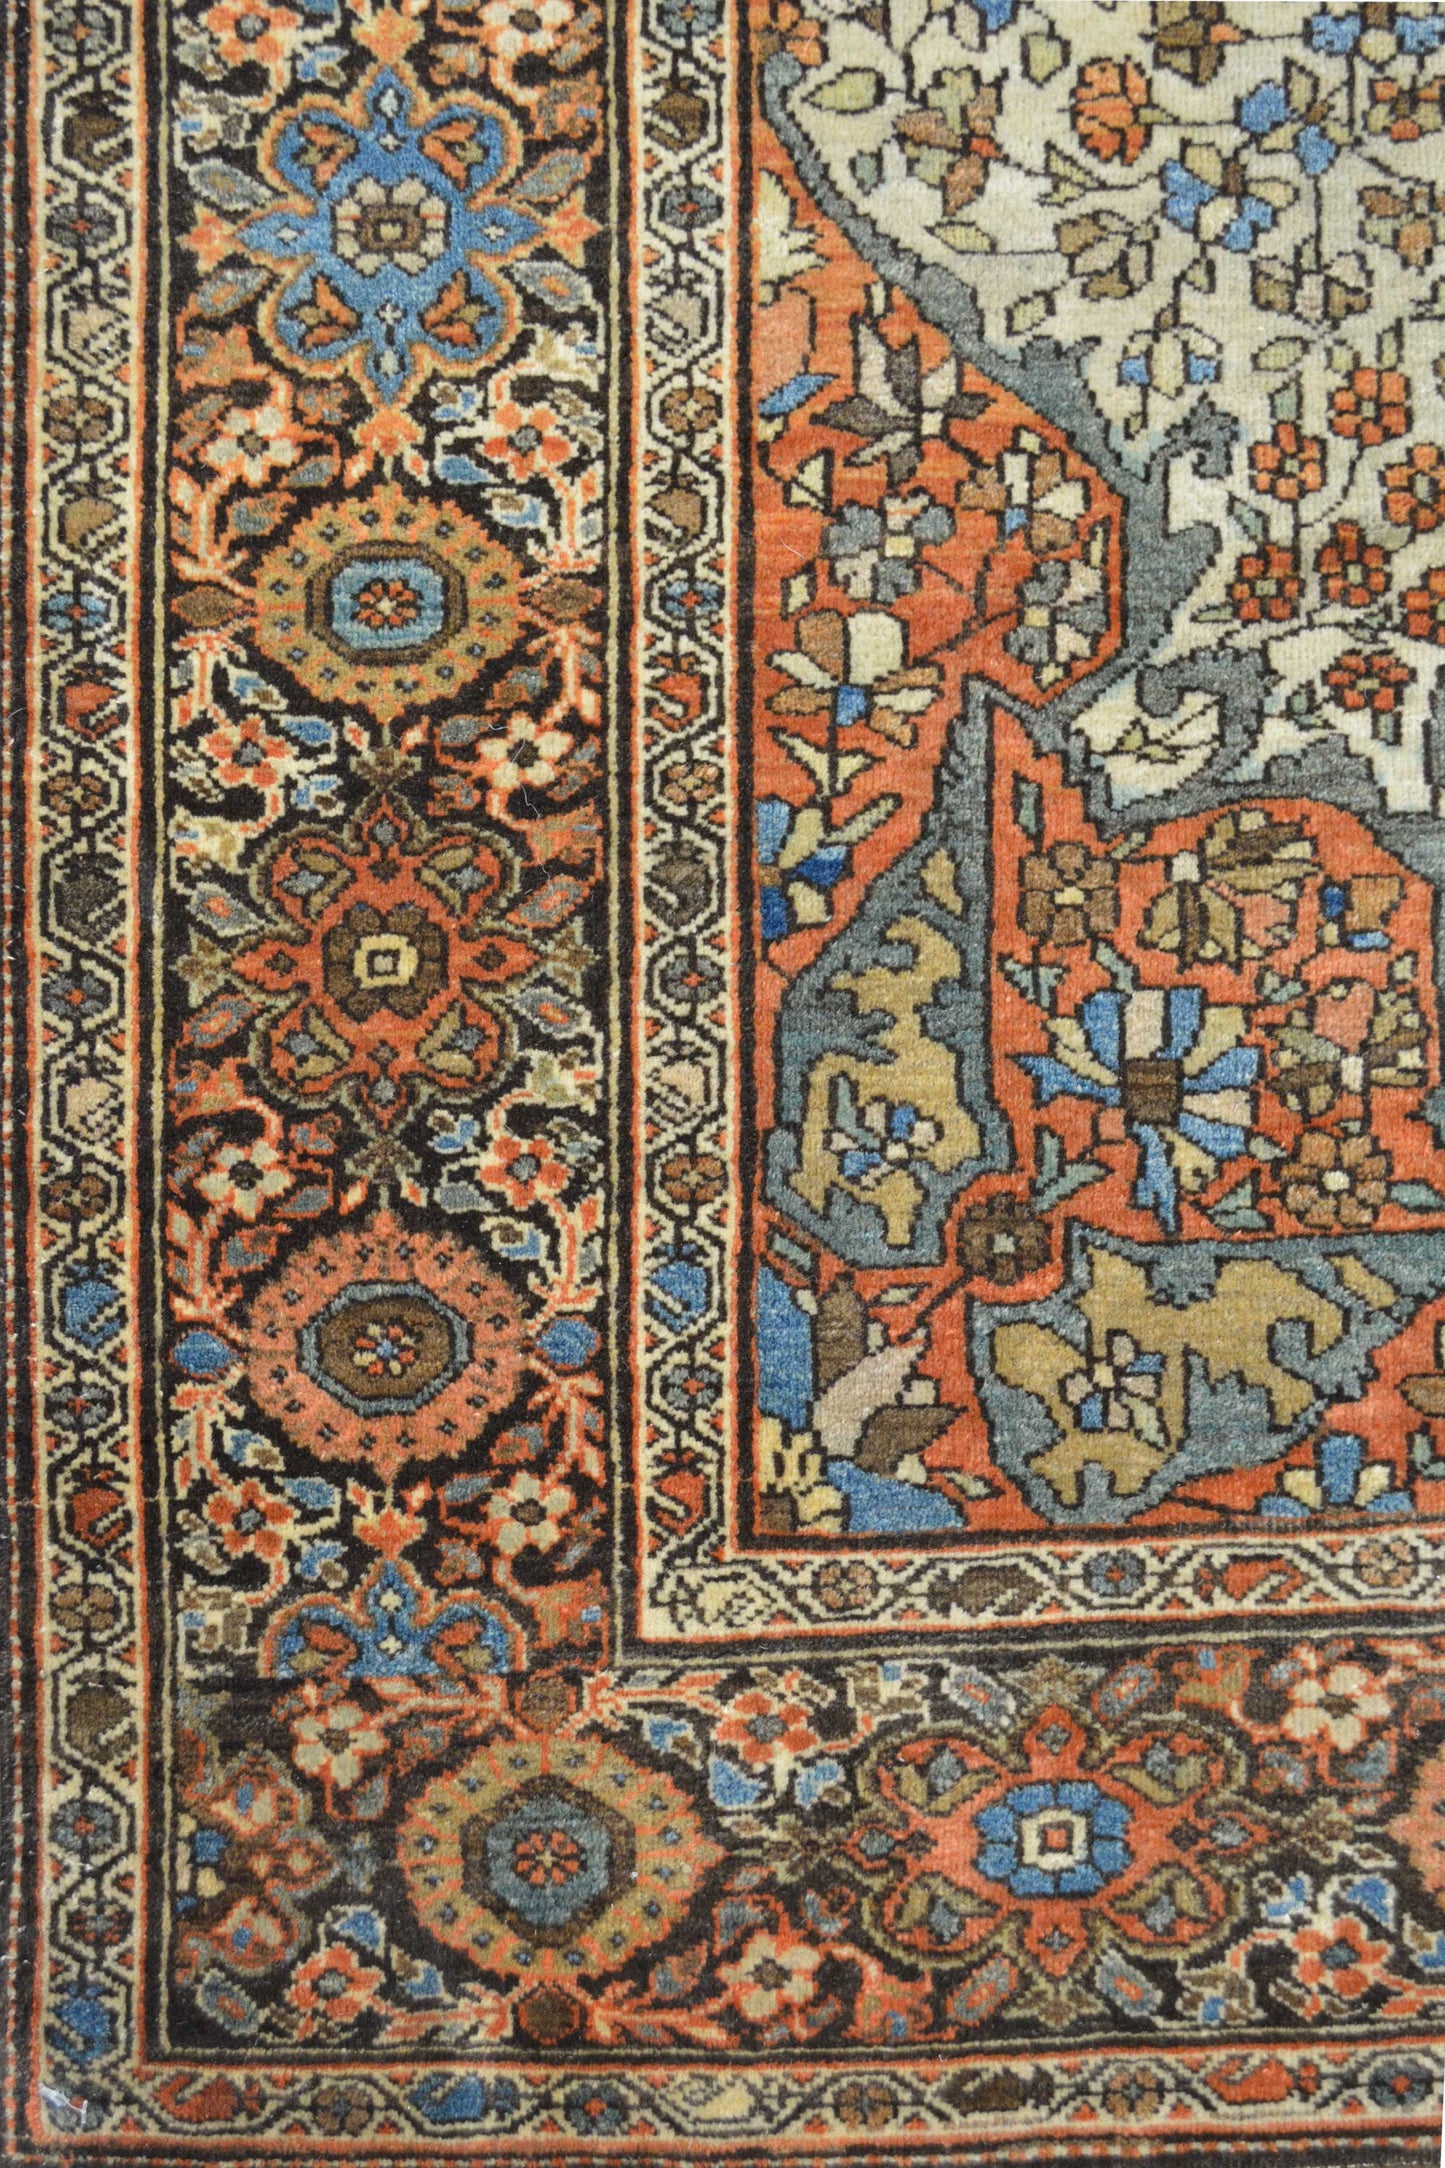 It comes with so many details which is the traditional antique style for this type of rugs.